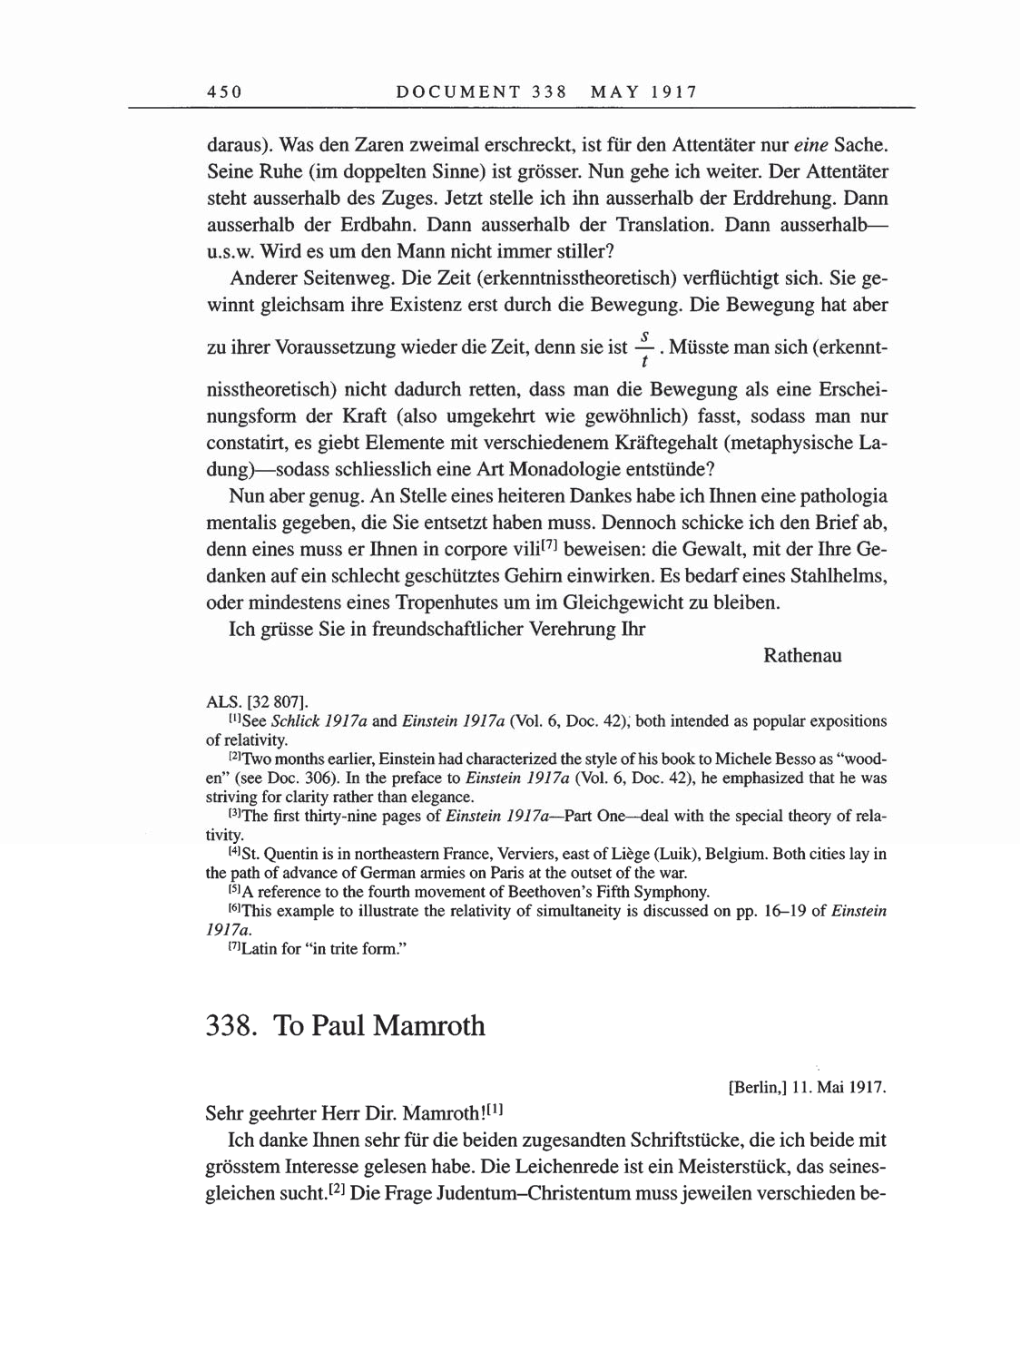 Volume 8, Part A: The Berlin Years: Correspondence 1914-1917 page 450